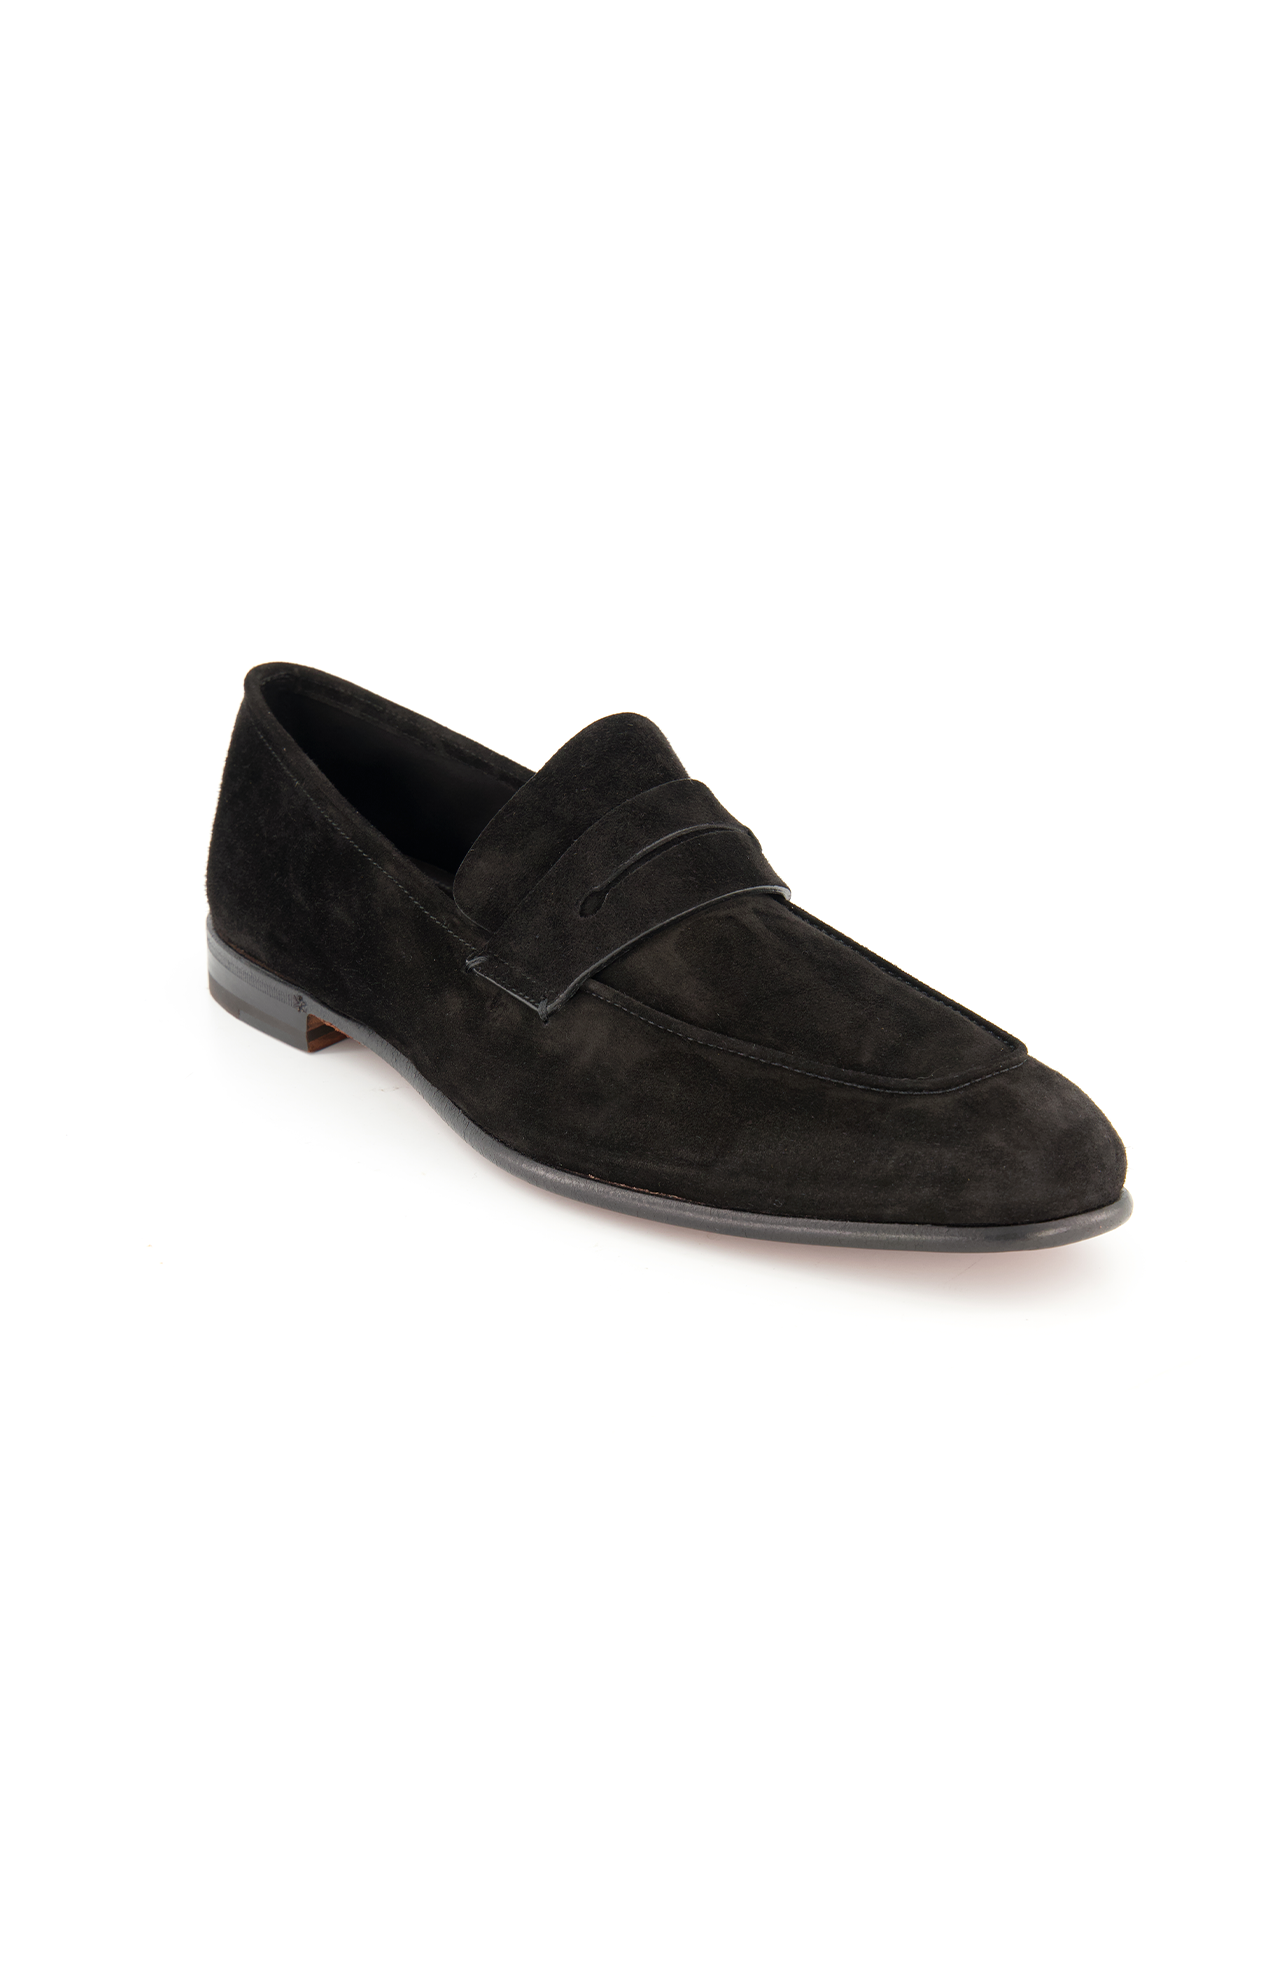 Zegna Suede L'Asola Moccasin in Black - Angle Image (6884450140275)